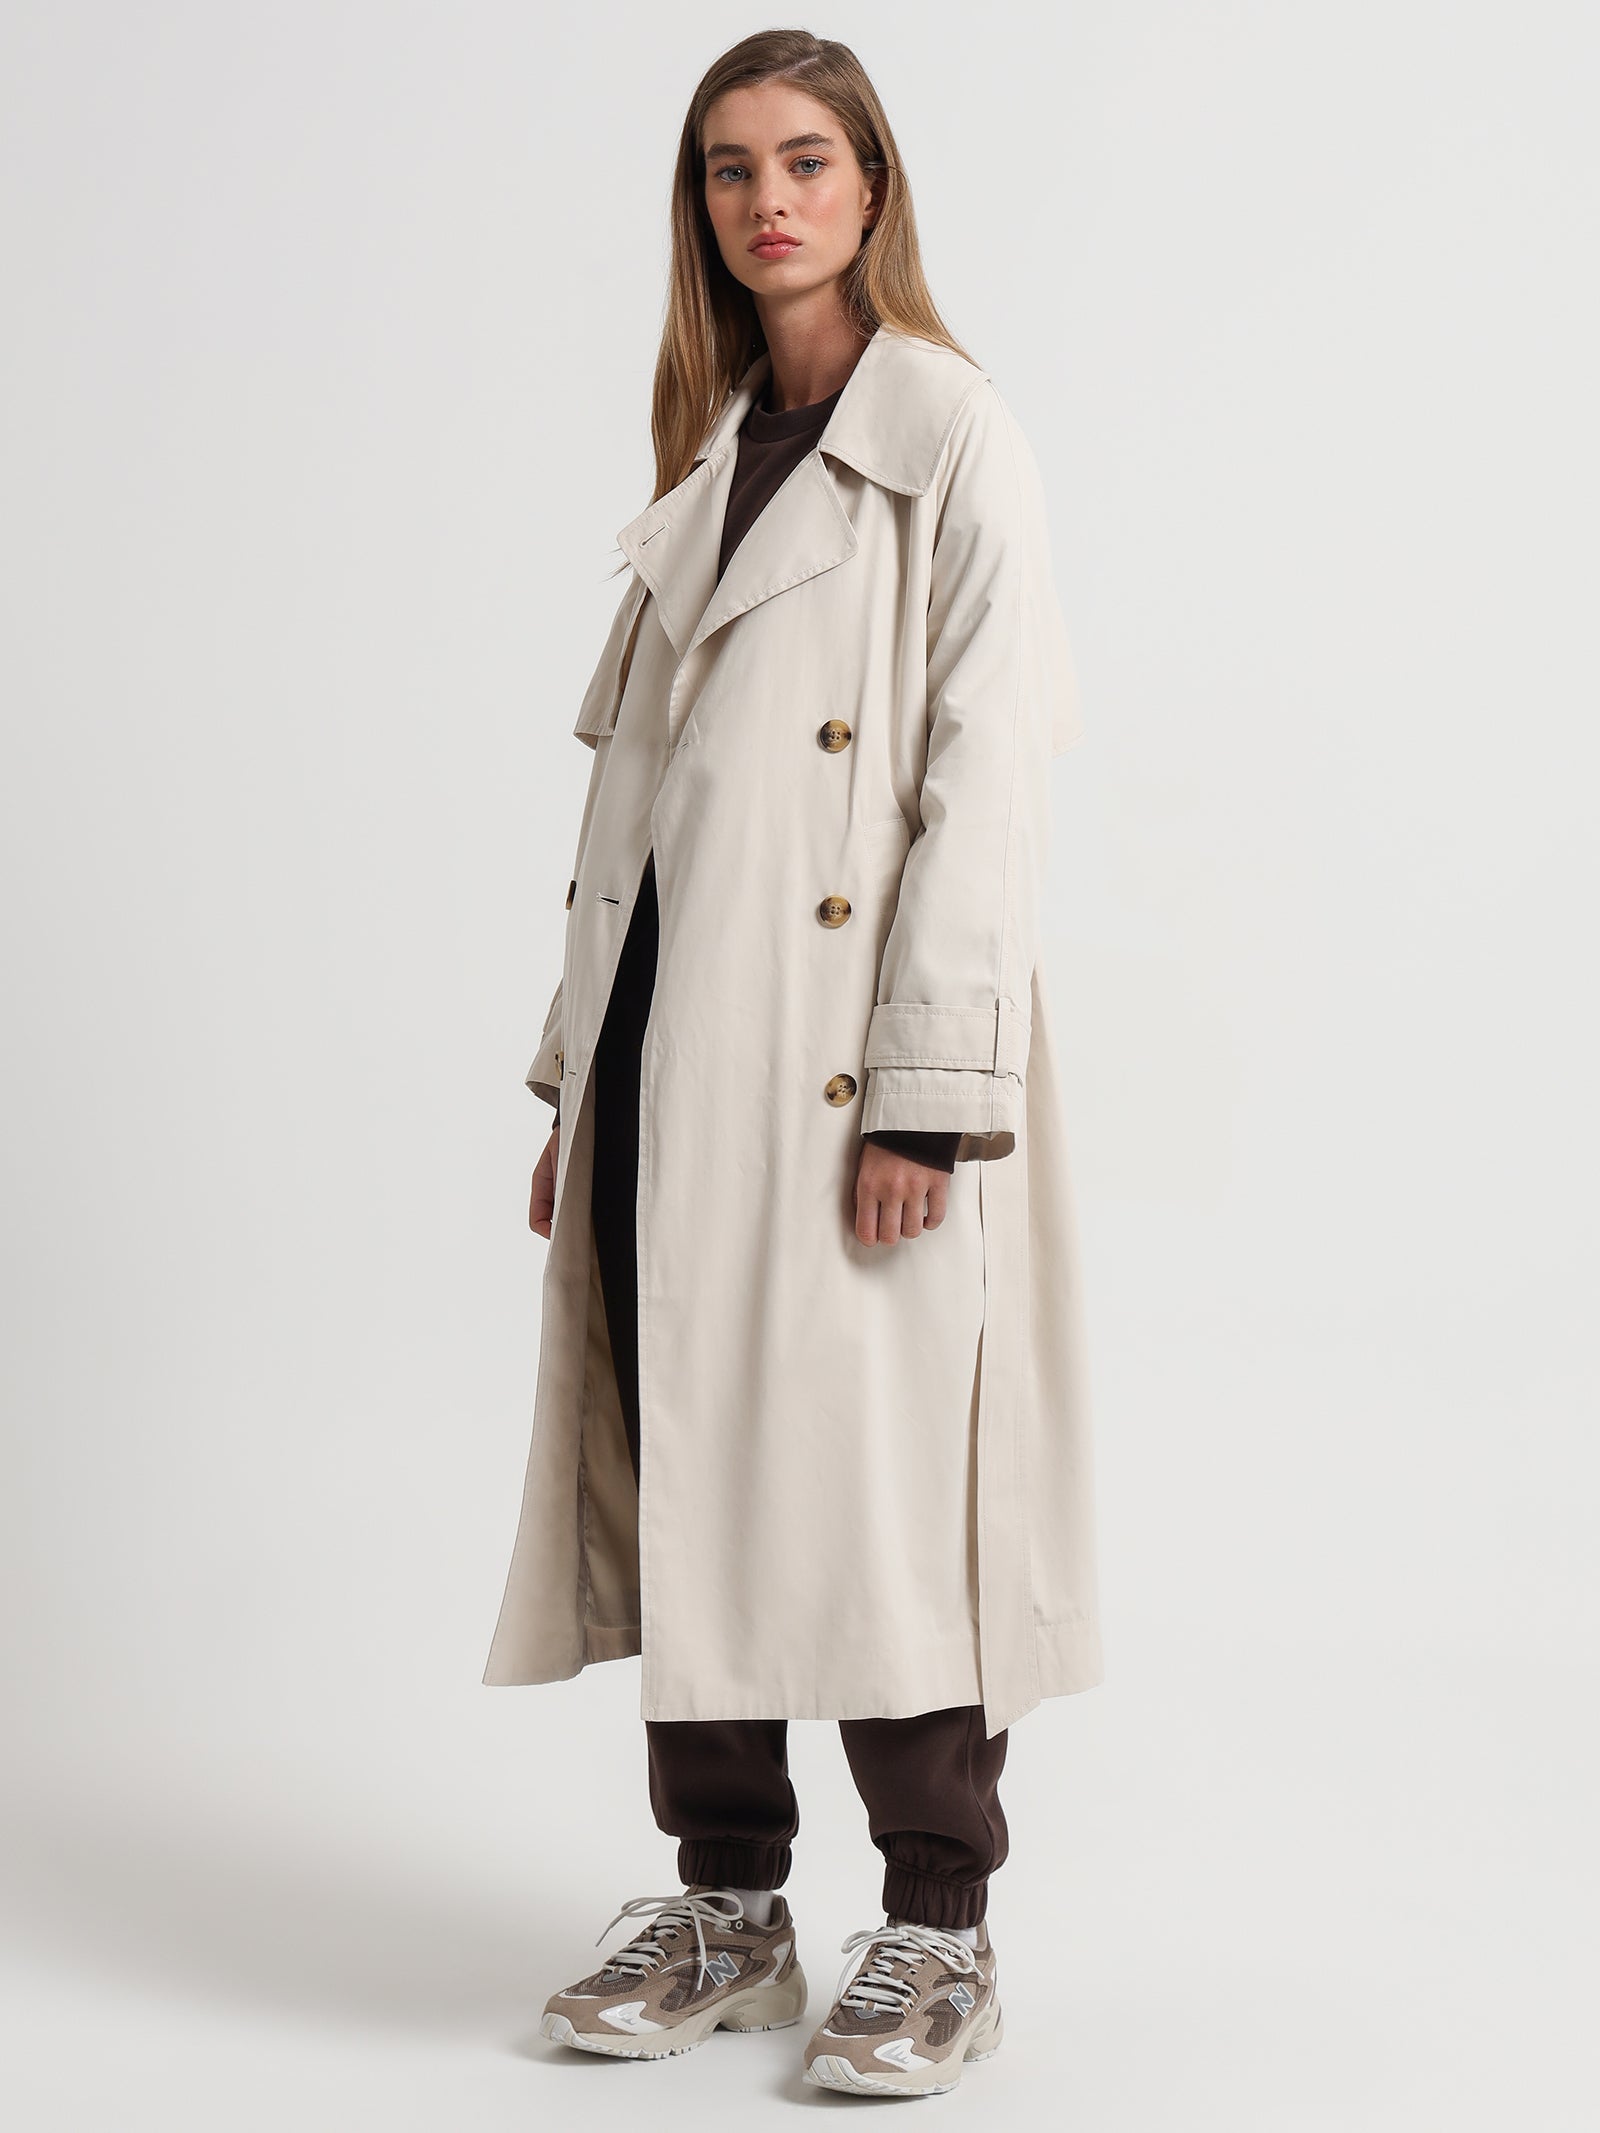 Odyssey Trench Coat in Cloud White - Glue Store